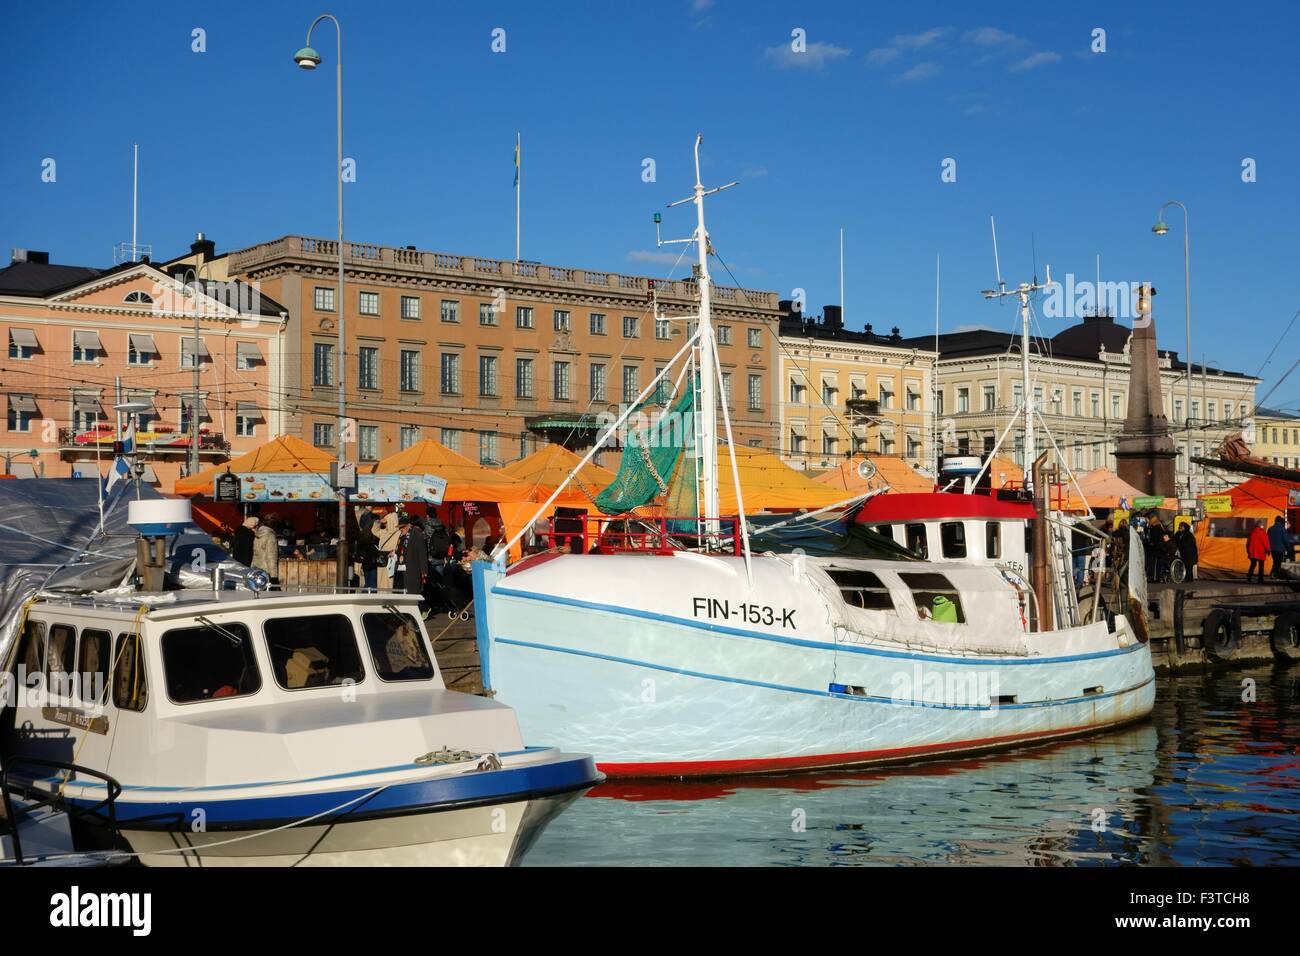 Fishing boats at the Market Square in Helsinki, Finland Stock Photo